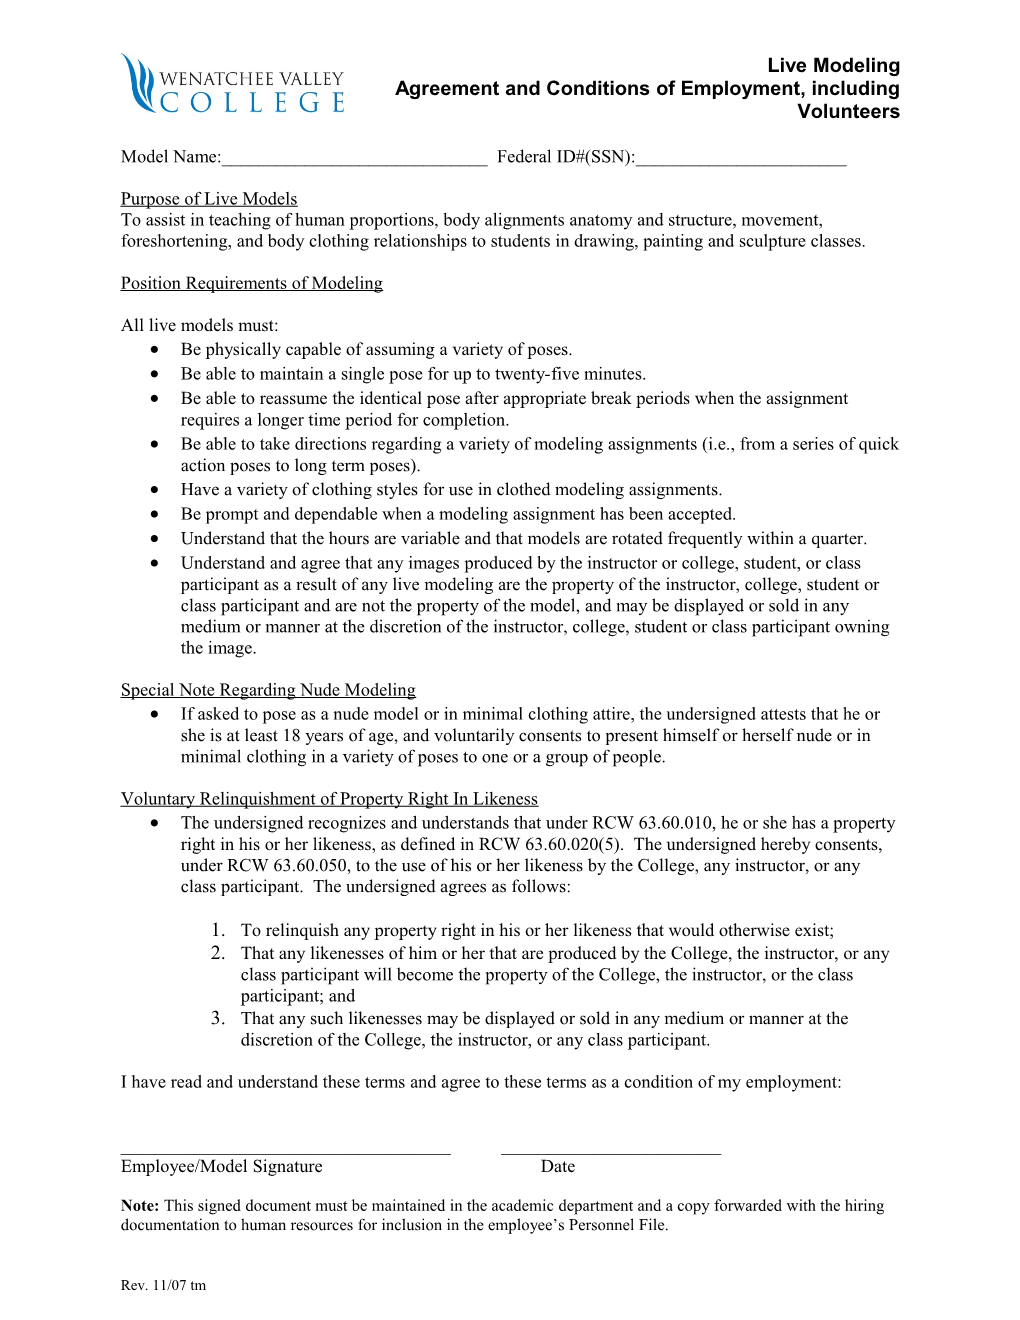 Agreement and Conditions of Employment, Including Volunteers